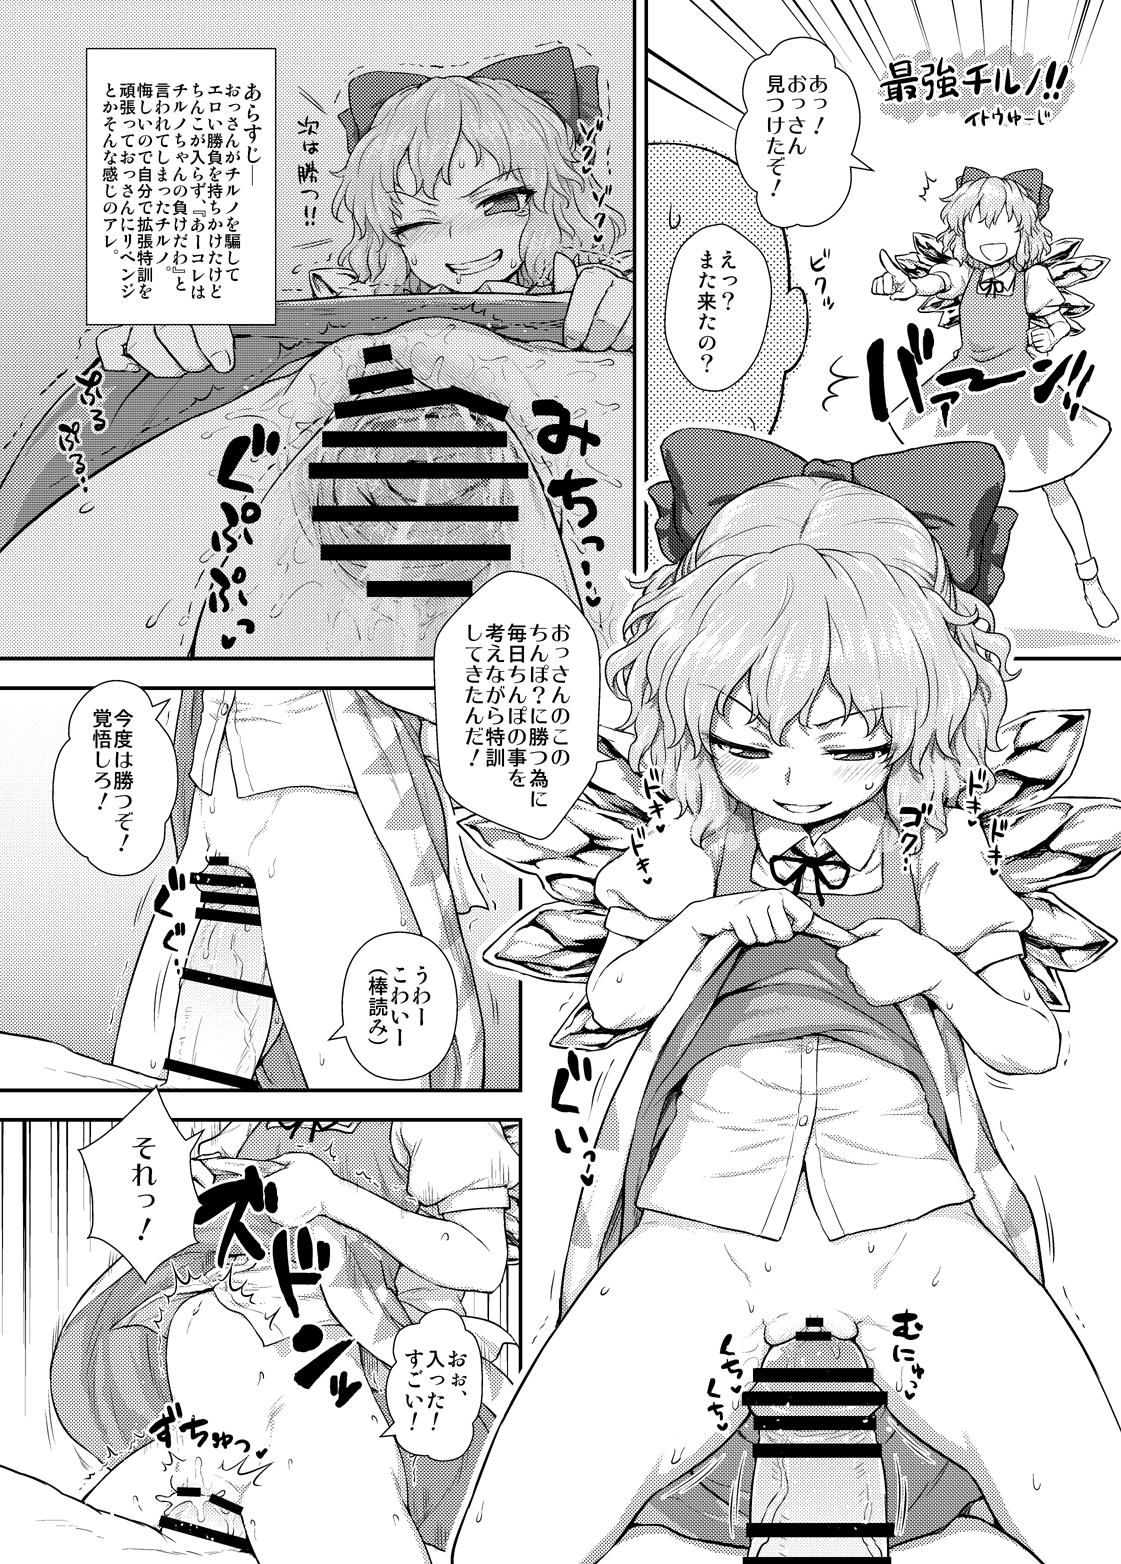 Pay 『東方子宮脱合同誌』 - Touhou project Tight Ass - Page 1